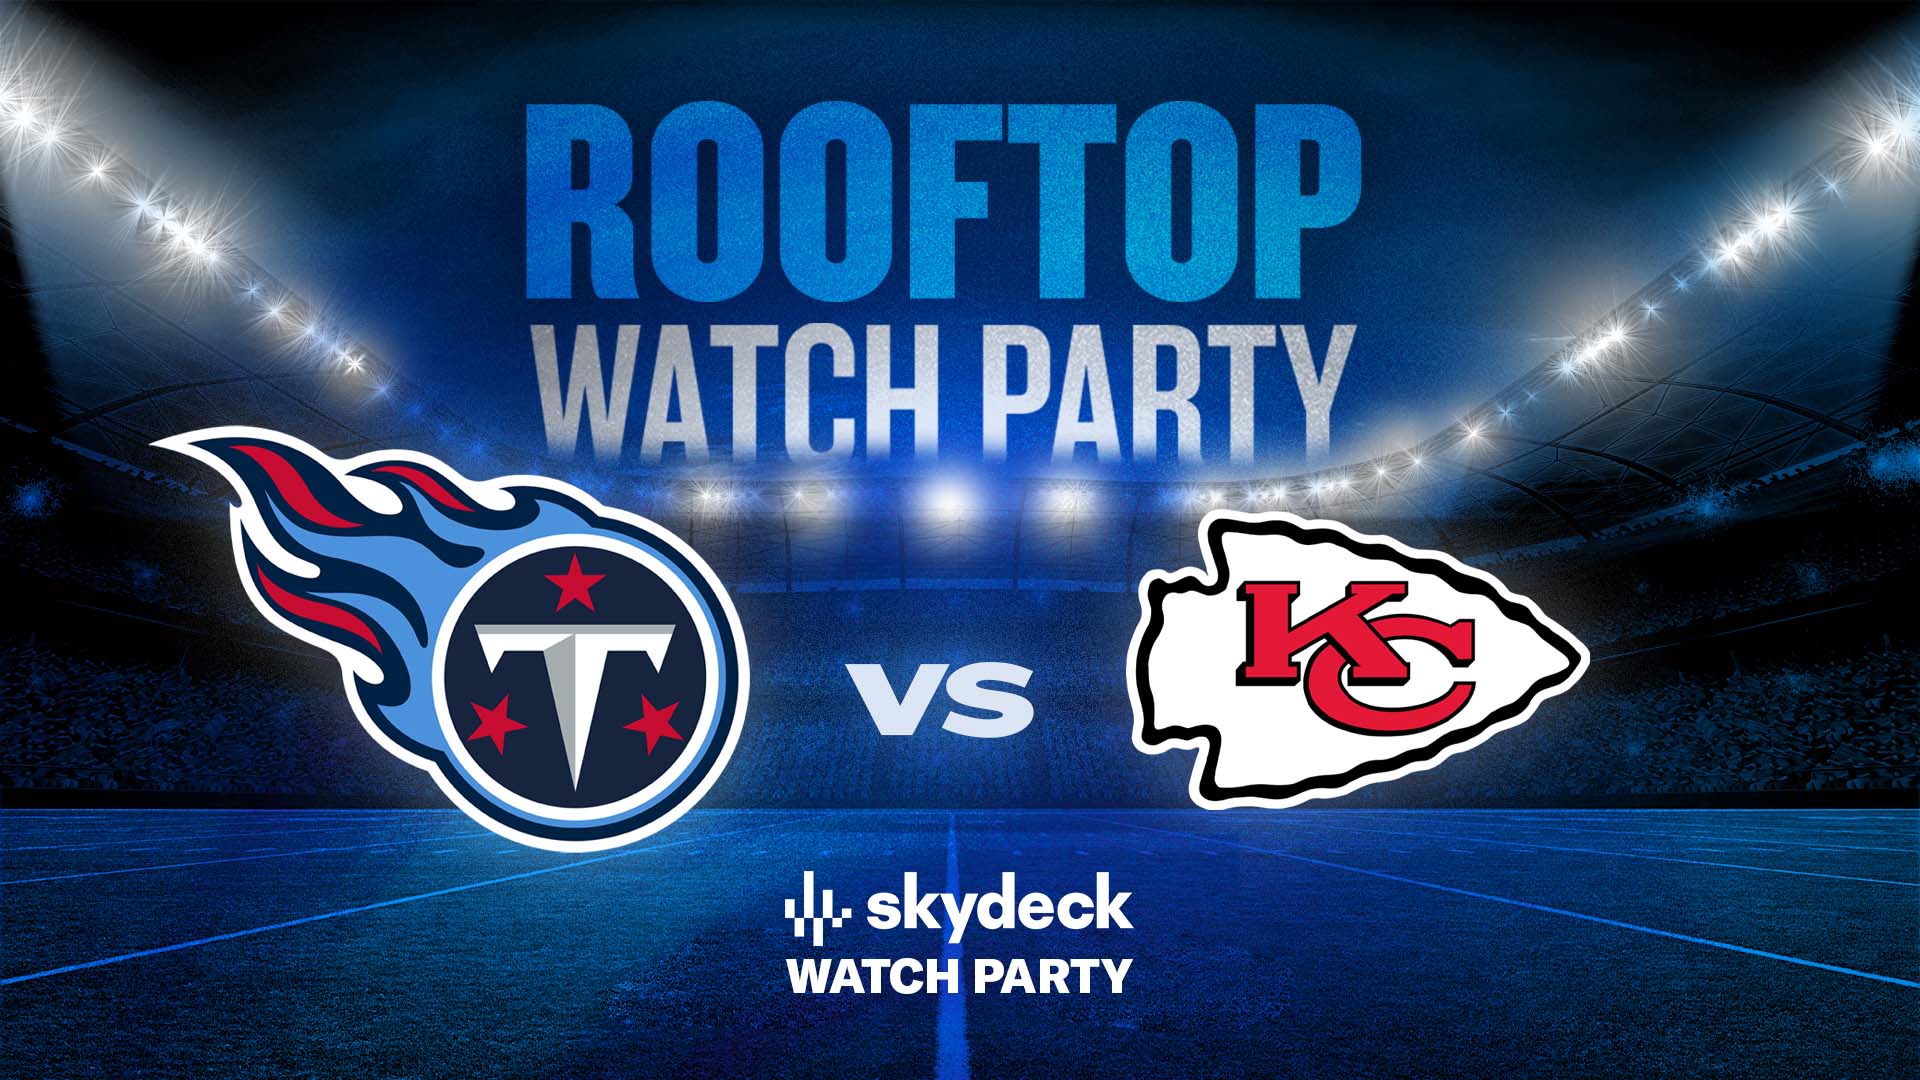 Titans vs. Chiefs | Skydeck Watch Party - hero